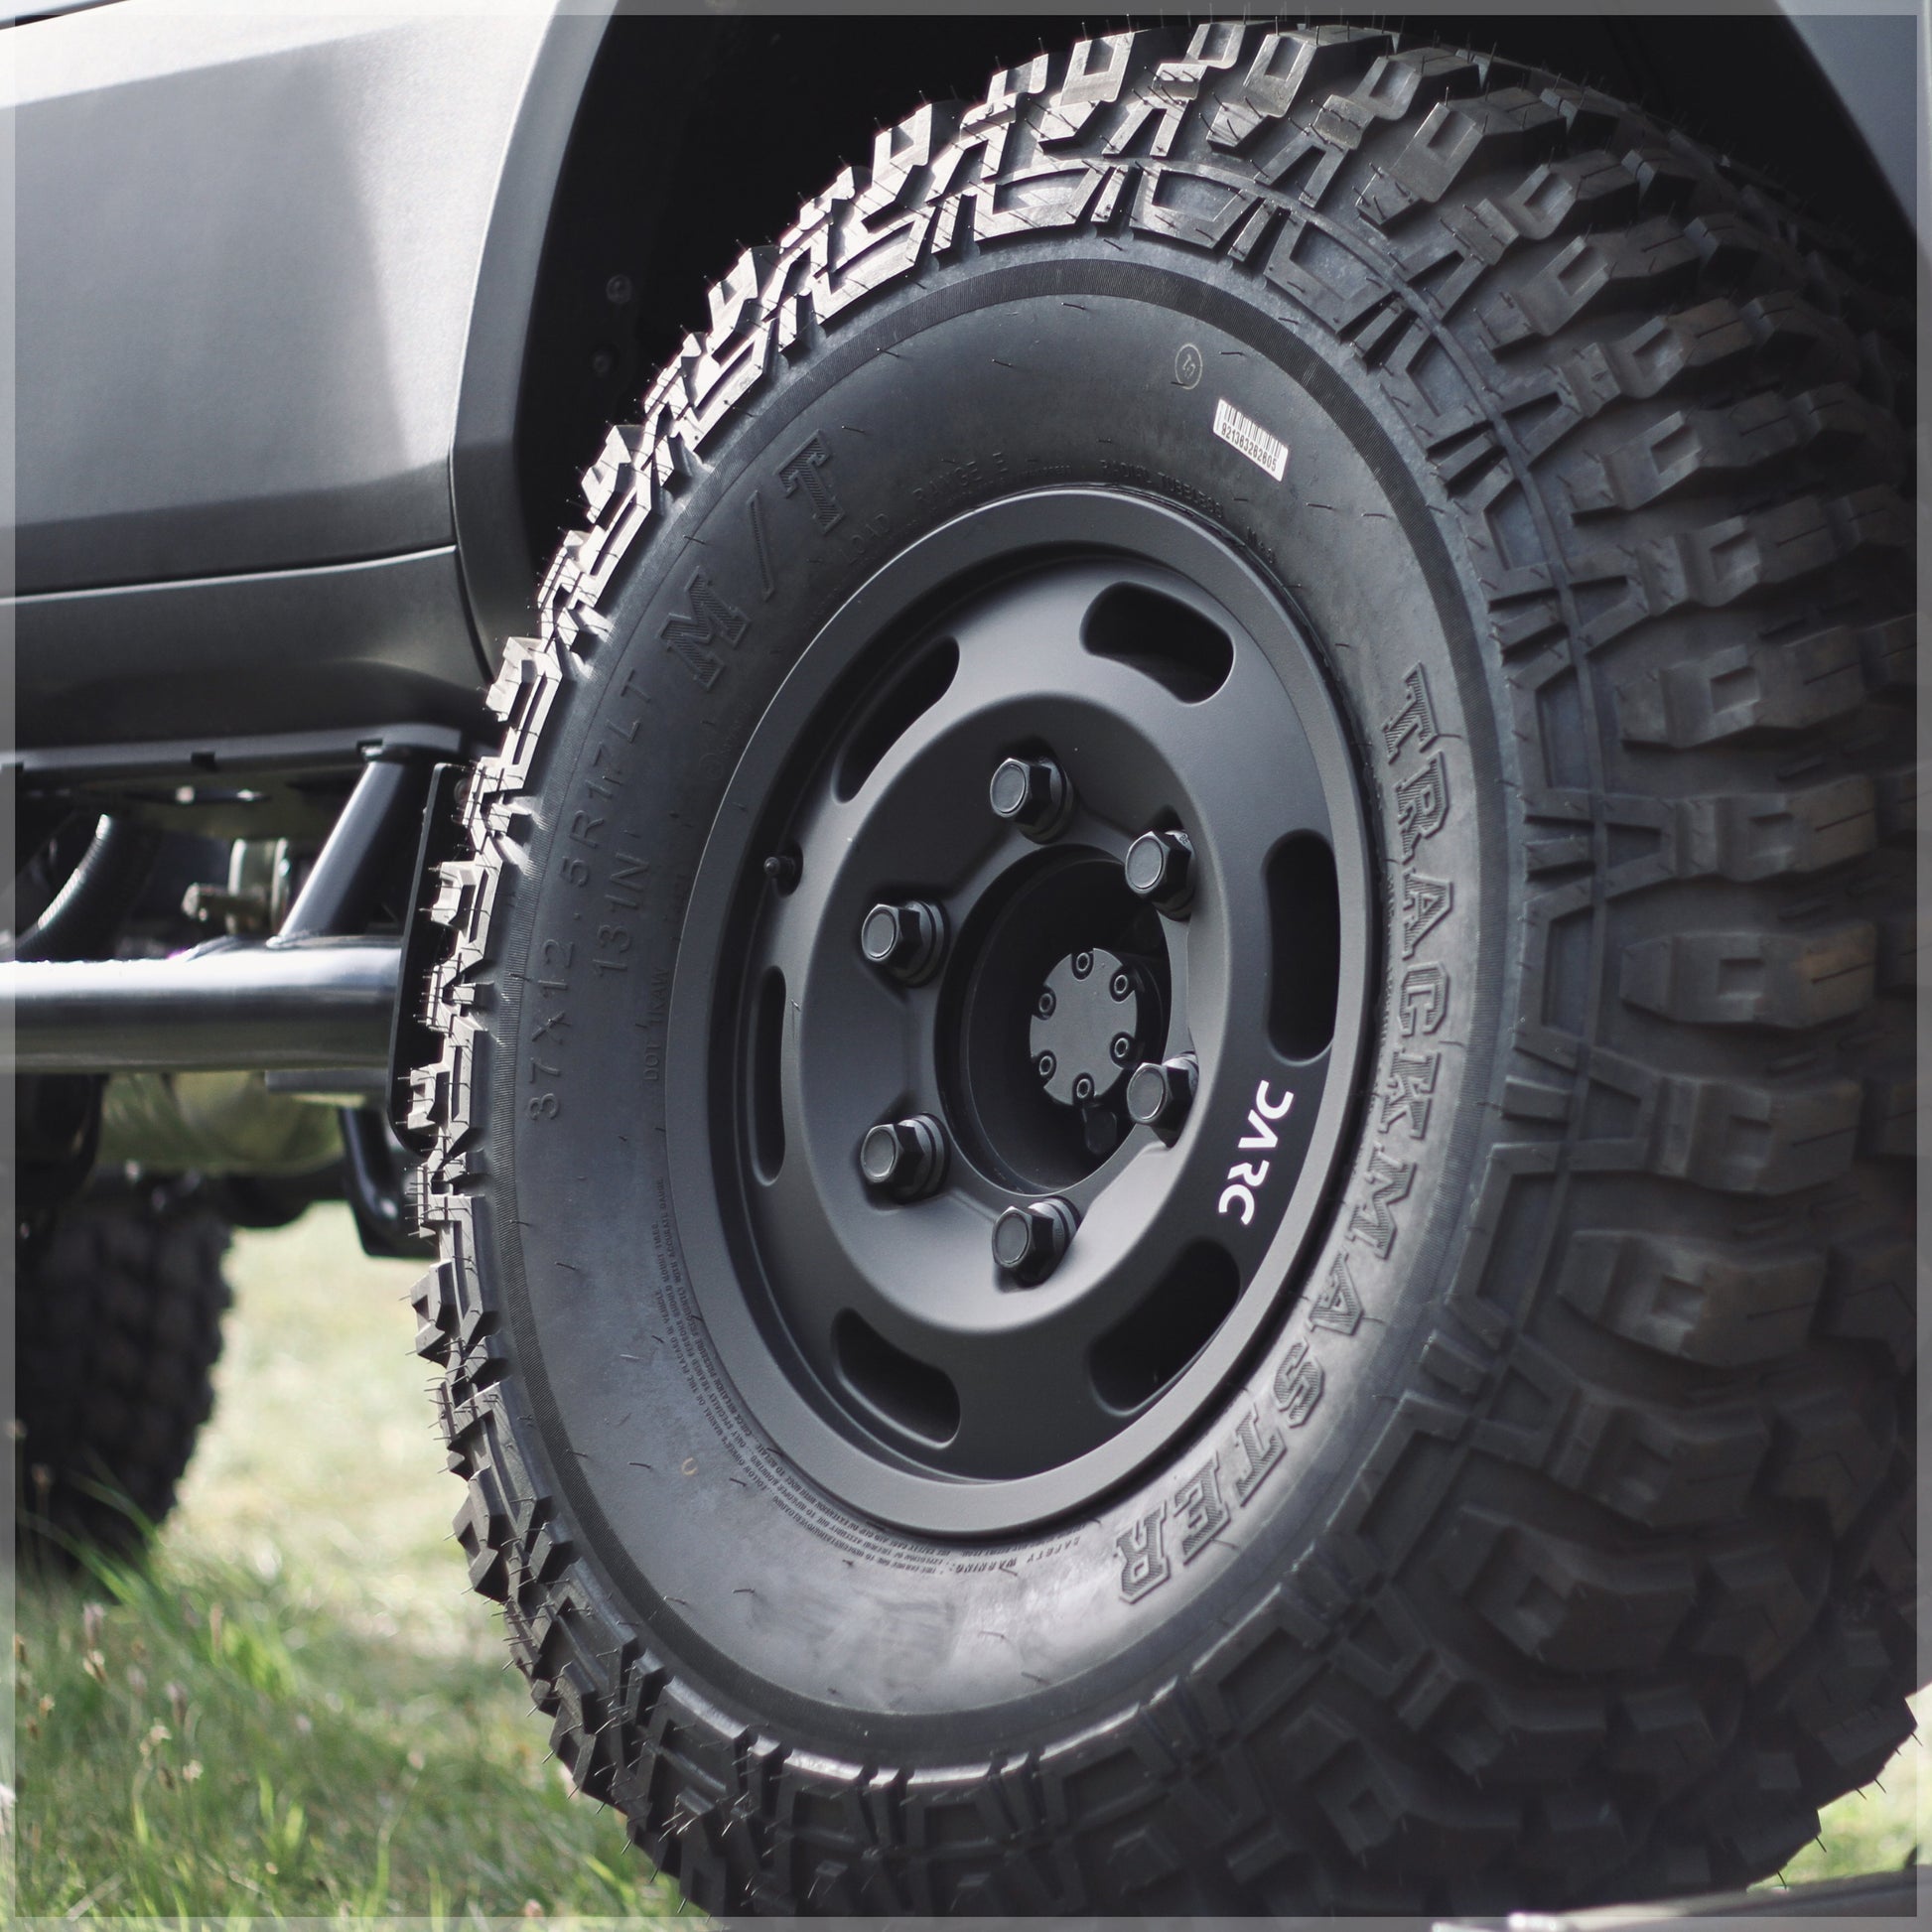 New Off-Road wheels for the Iveco Daily – delta4x4